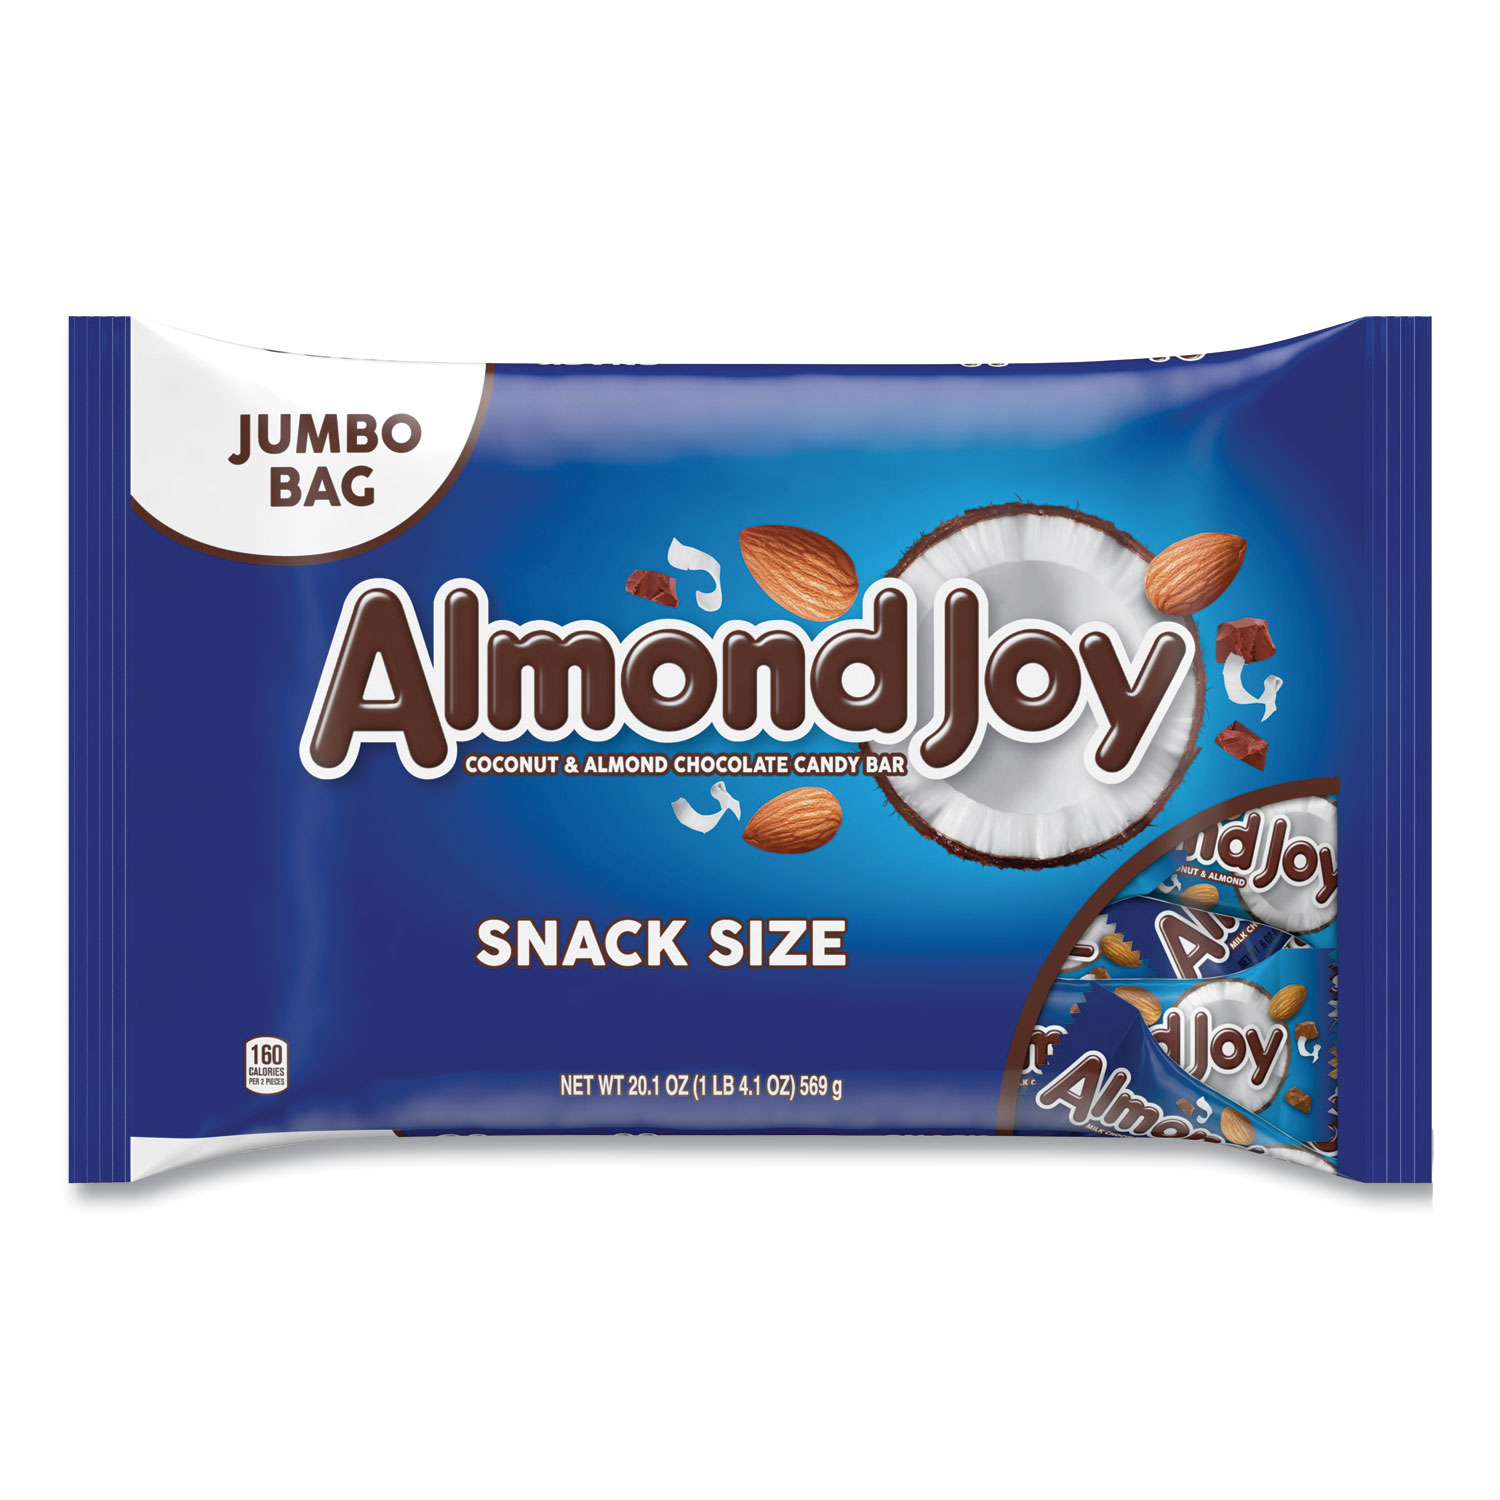 Almond Joy® Snack Size Candy Bars, 20.1 oz Bag, Free Delivery in 1-4 Business Days